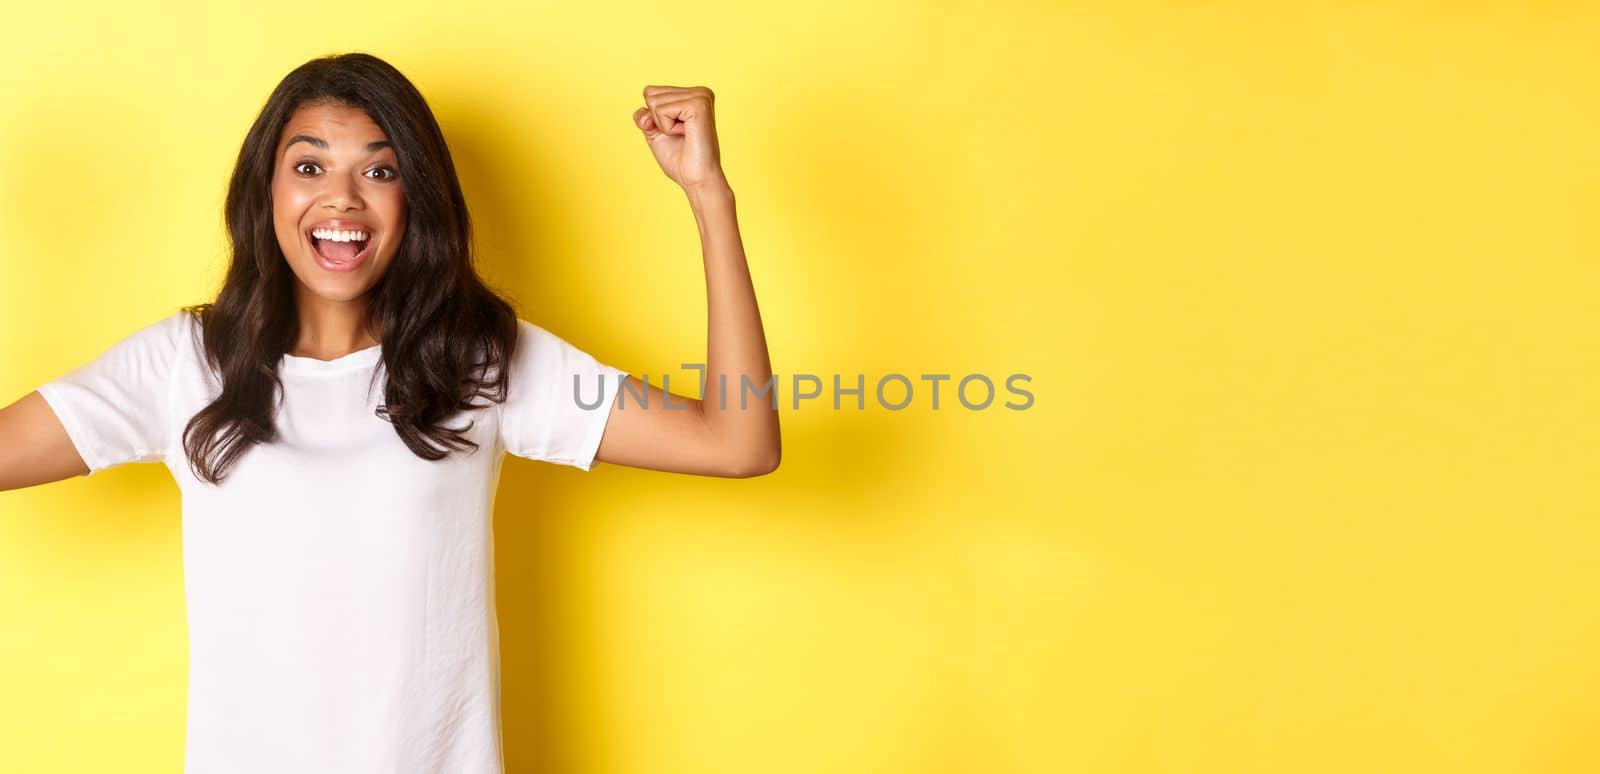 Image of happy african-american girl achieve goal and celebrating victory, raising hands up and smiling pleased, looking satisfied, standing over yellow background.